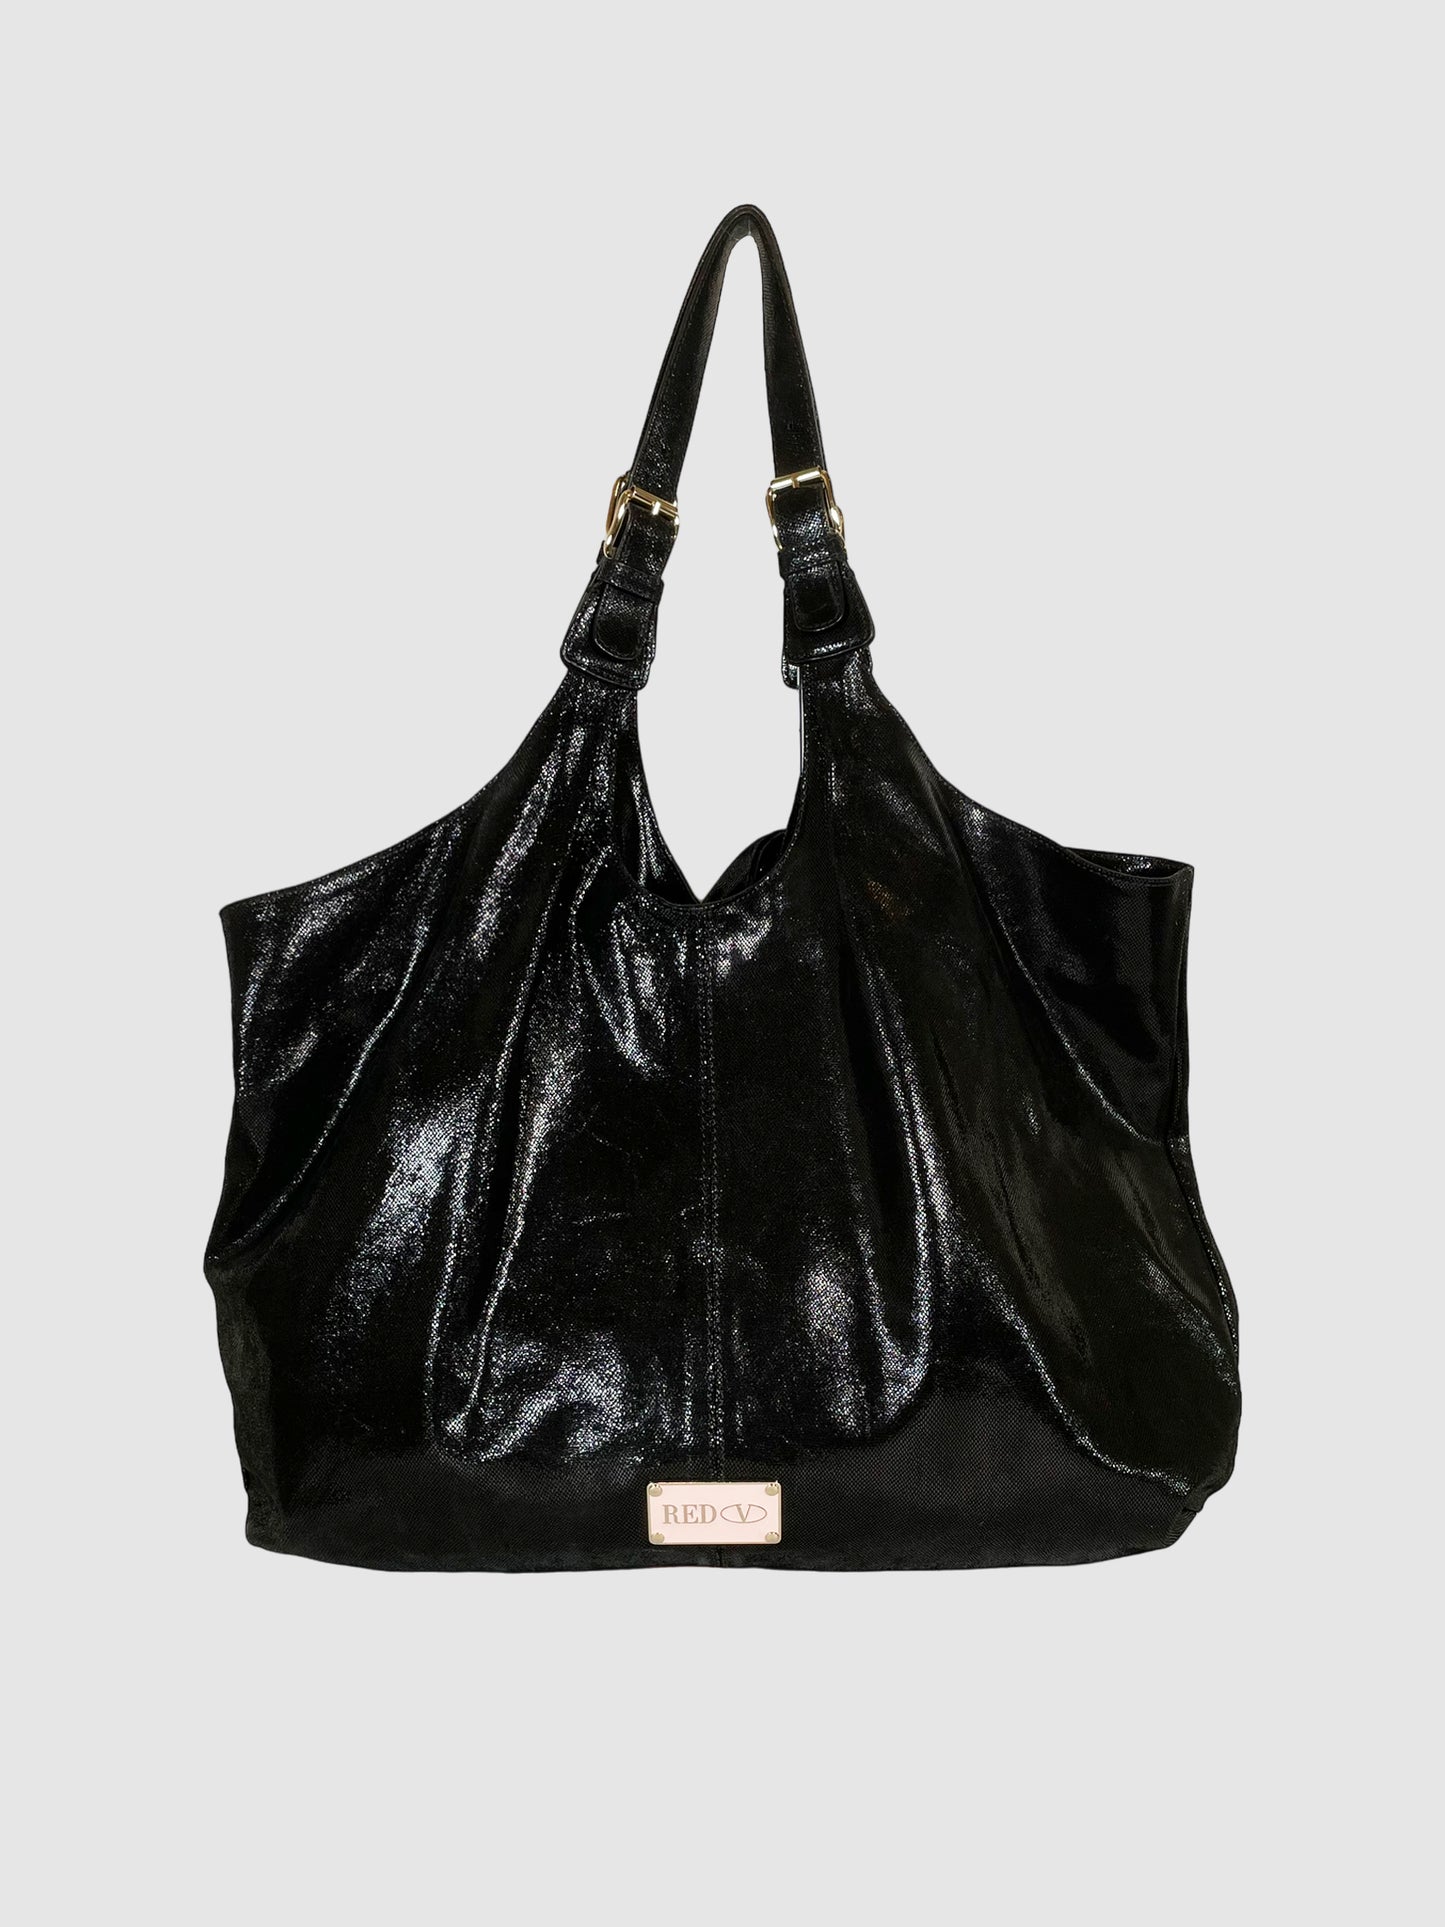 Red Valentino Bow-Accented Leather Hobo Bag